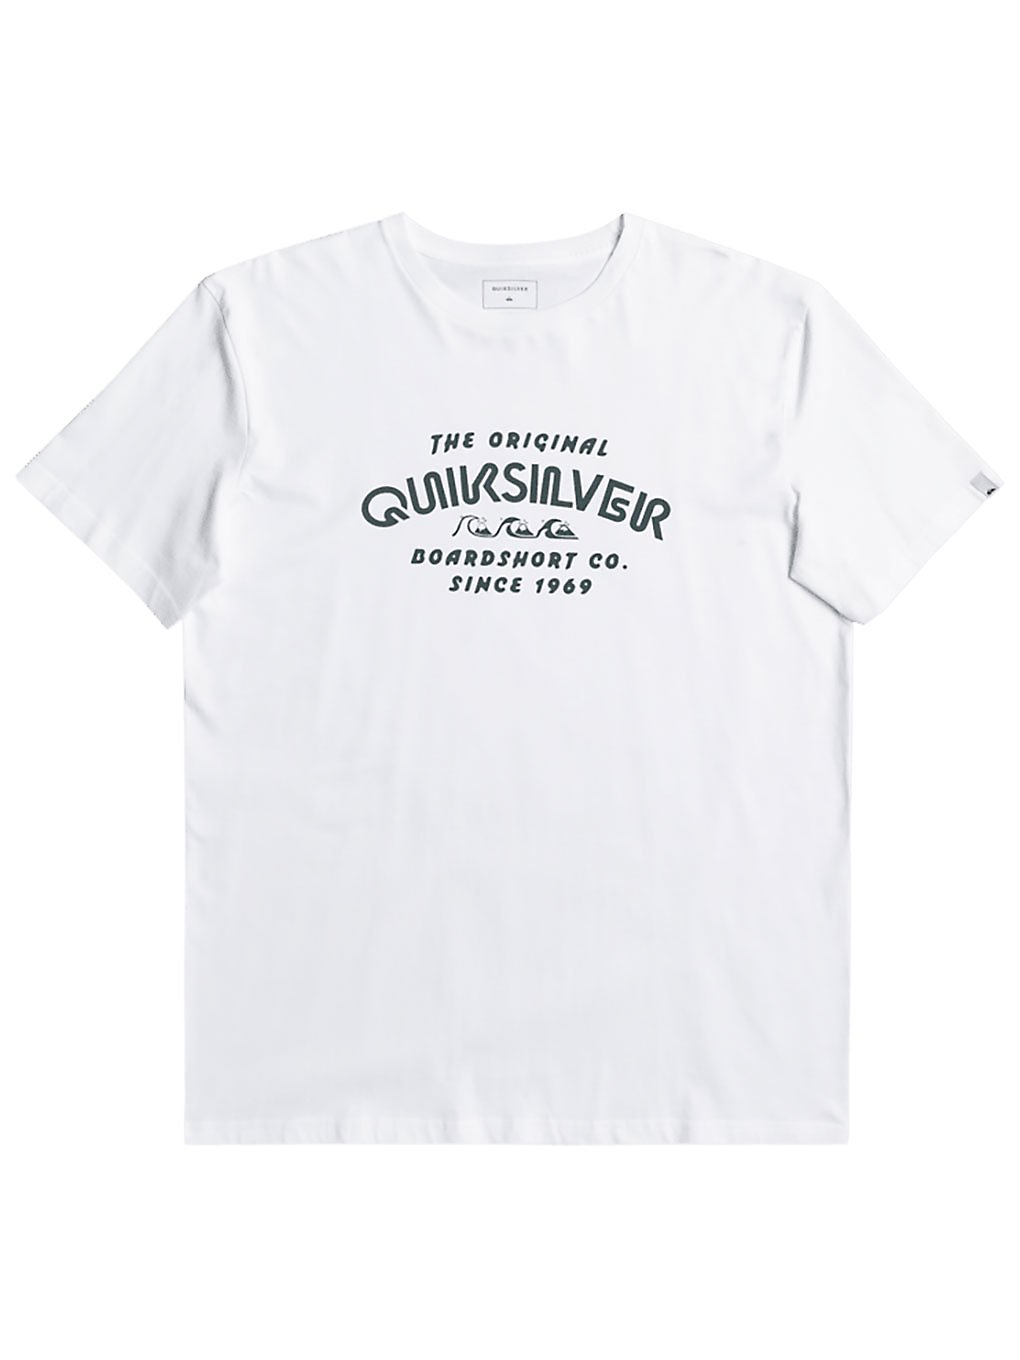 Quiksilver Wider Mile T-Shirt white